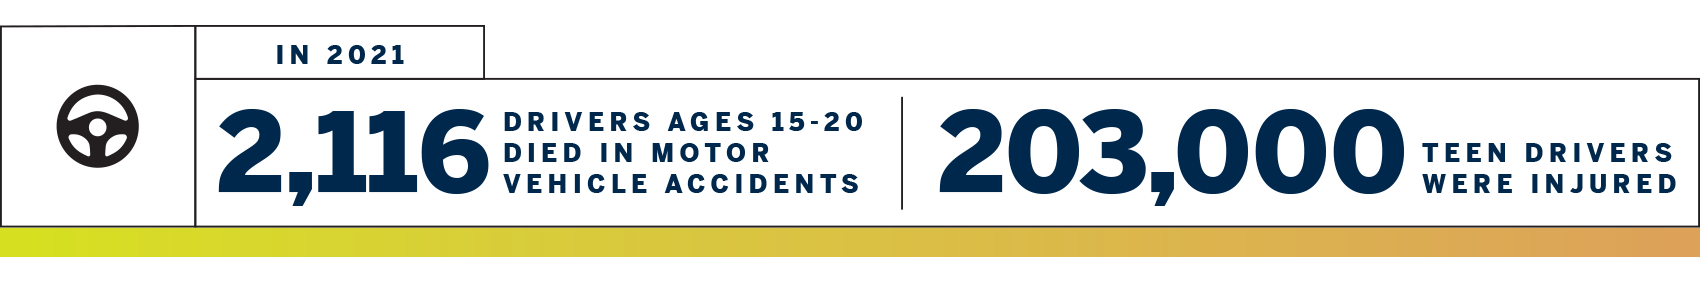 In 2021, 2,116 DRIVERS AGES 15-20 DIED IN MOTOR VEHICLE ACCIDENTS AND 203,000 TEEN DRIVERS WERE INJURED